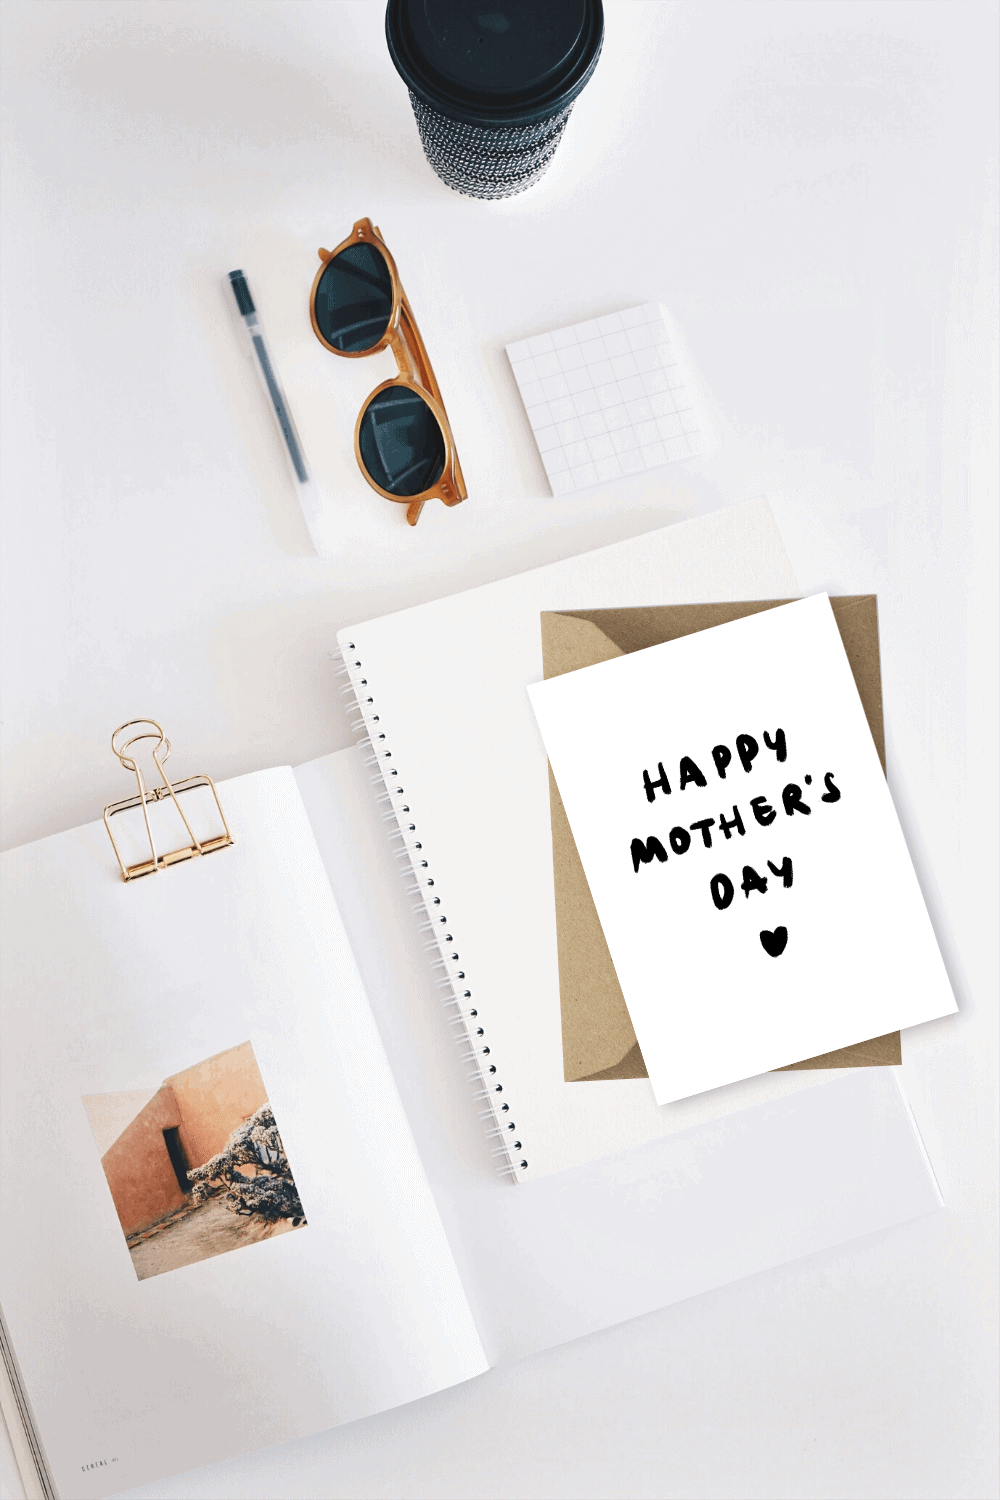 Free Happy Mother's Day Printables Handmade Simple DIY Ideas For the Love of Stationery (1)